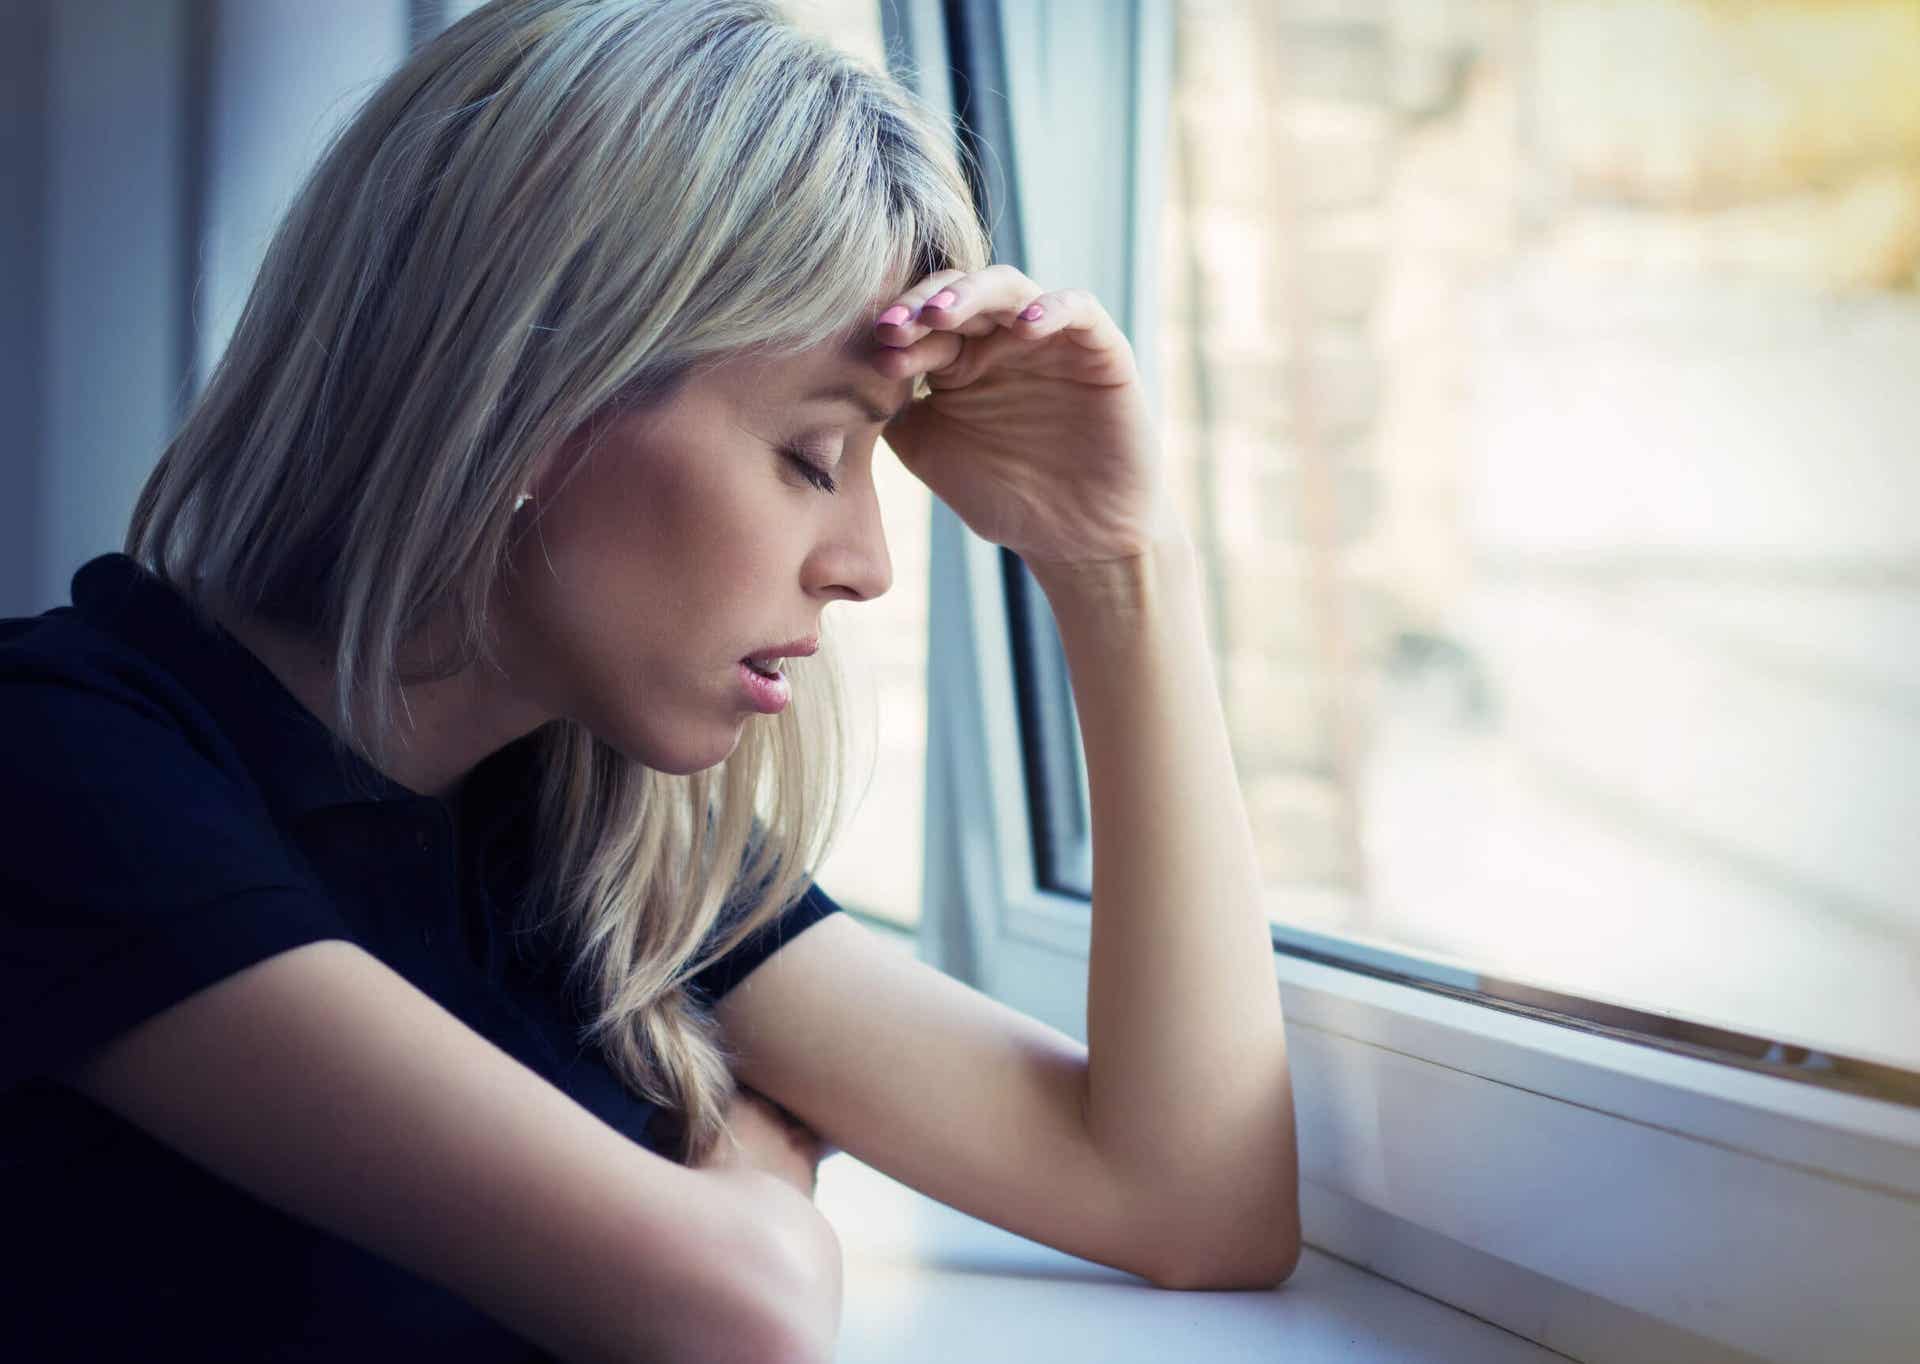 A woman leaning on a window sill, looking sad and stressed.